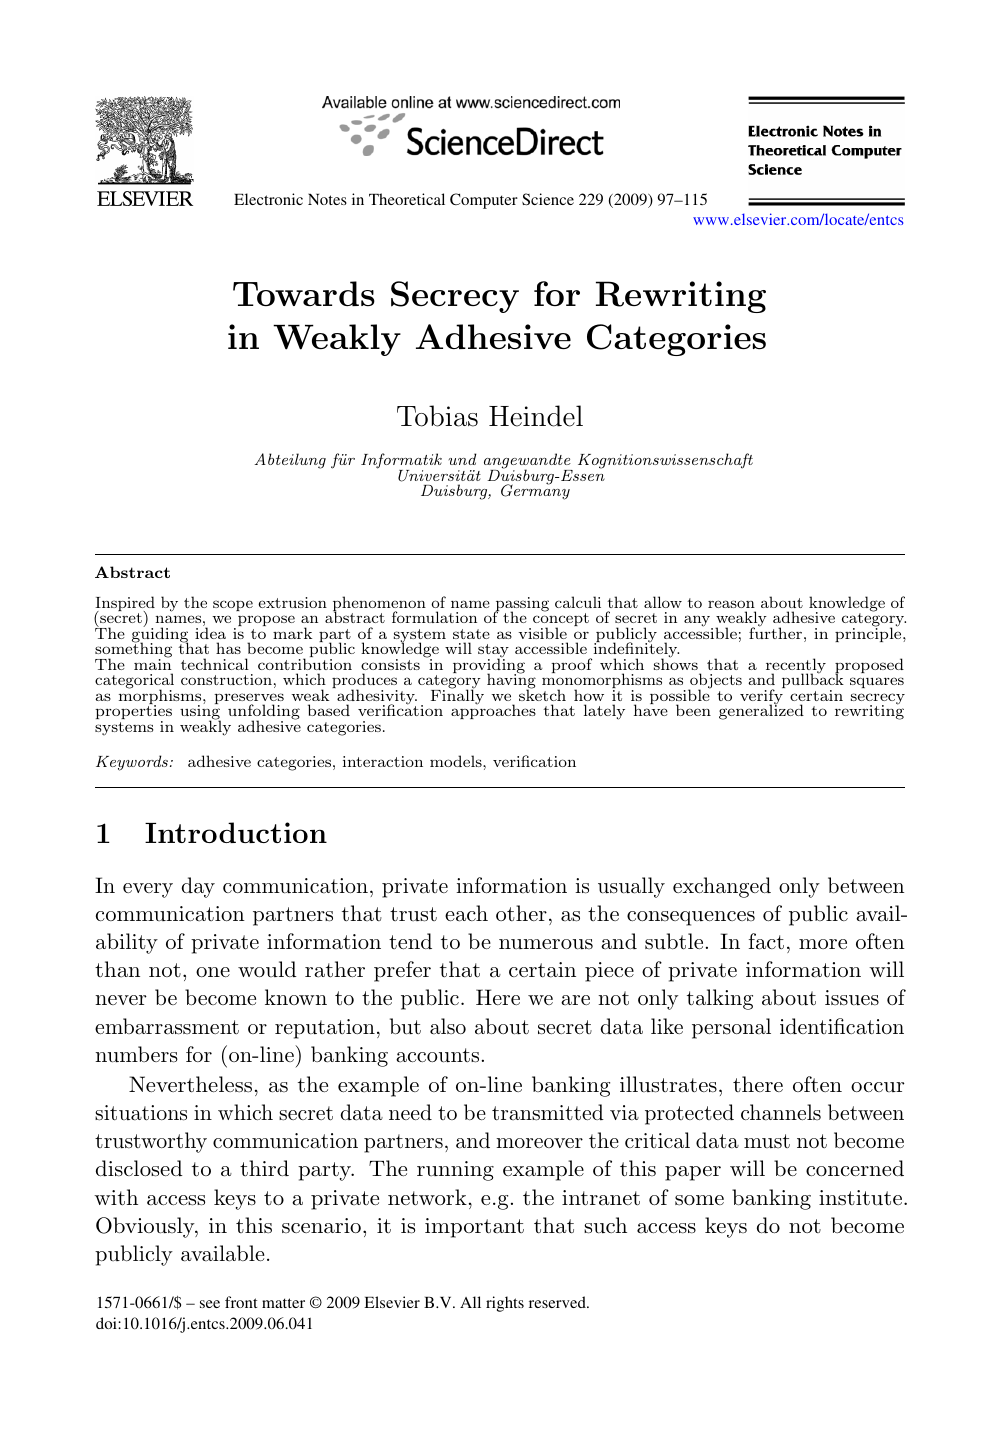 Towards Secrecy For Rewriting In Weakly Adhesive Categories Topic Of Research Paper In Computer And Information Sciences Download Scholarly Article Pdf And Read For Free On Cyberleninka Open Science Hub